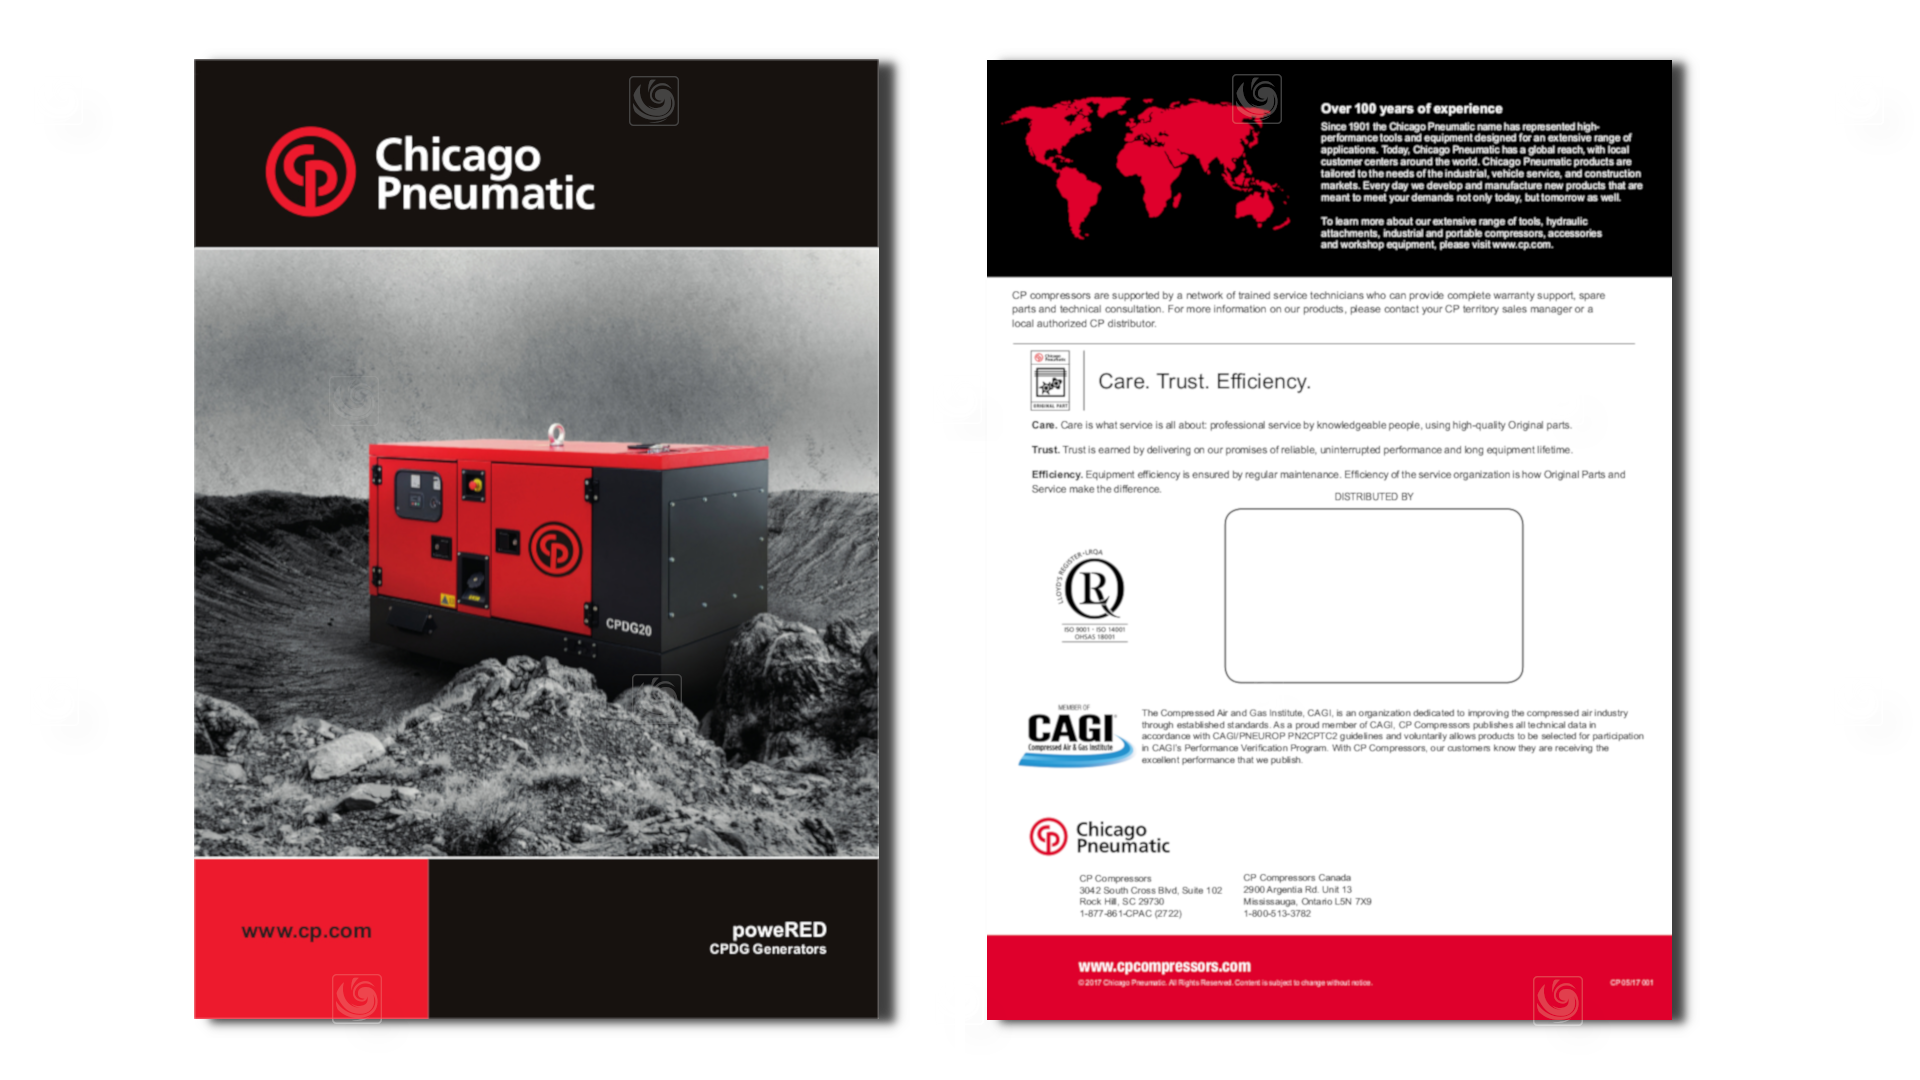 Brochure used as an entry marker to the Augmented Reality, developed for Chicago Pneumatic